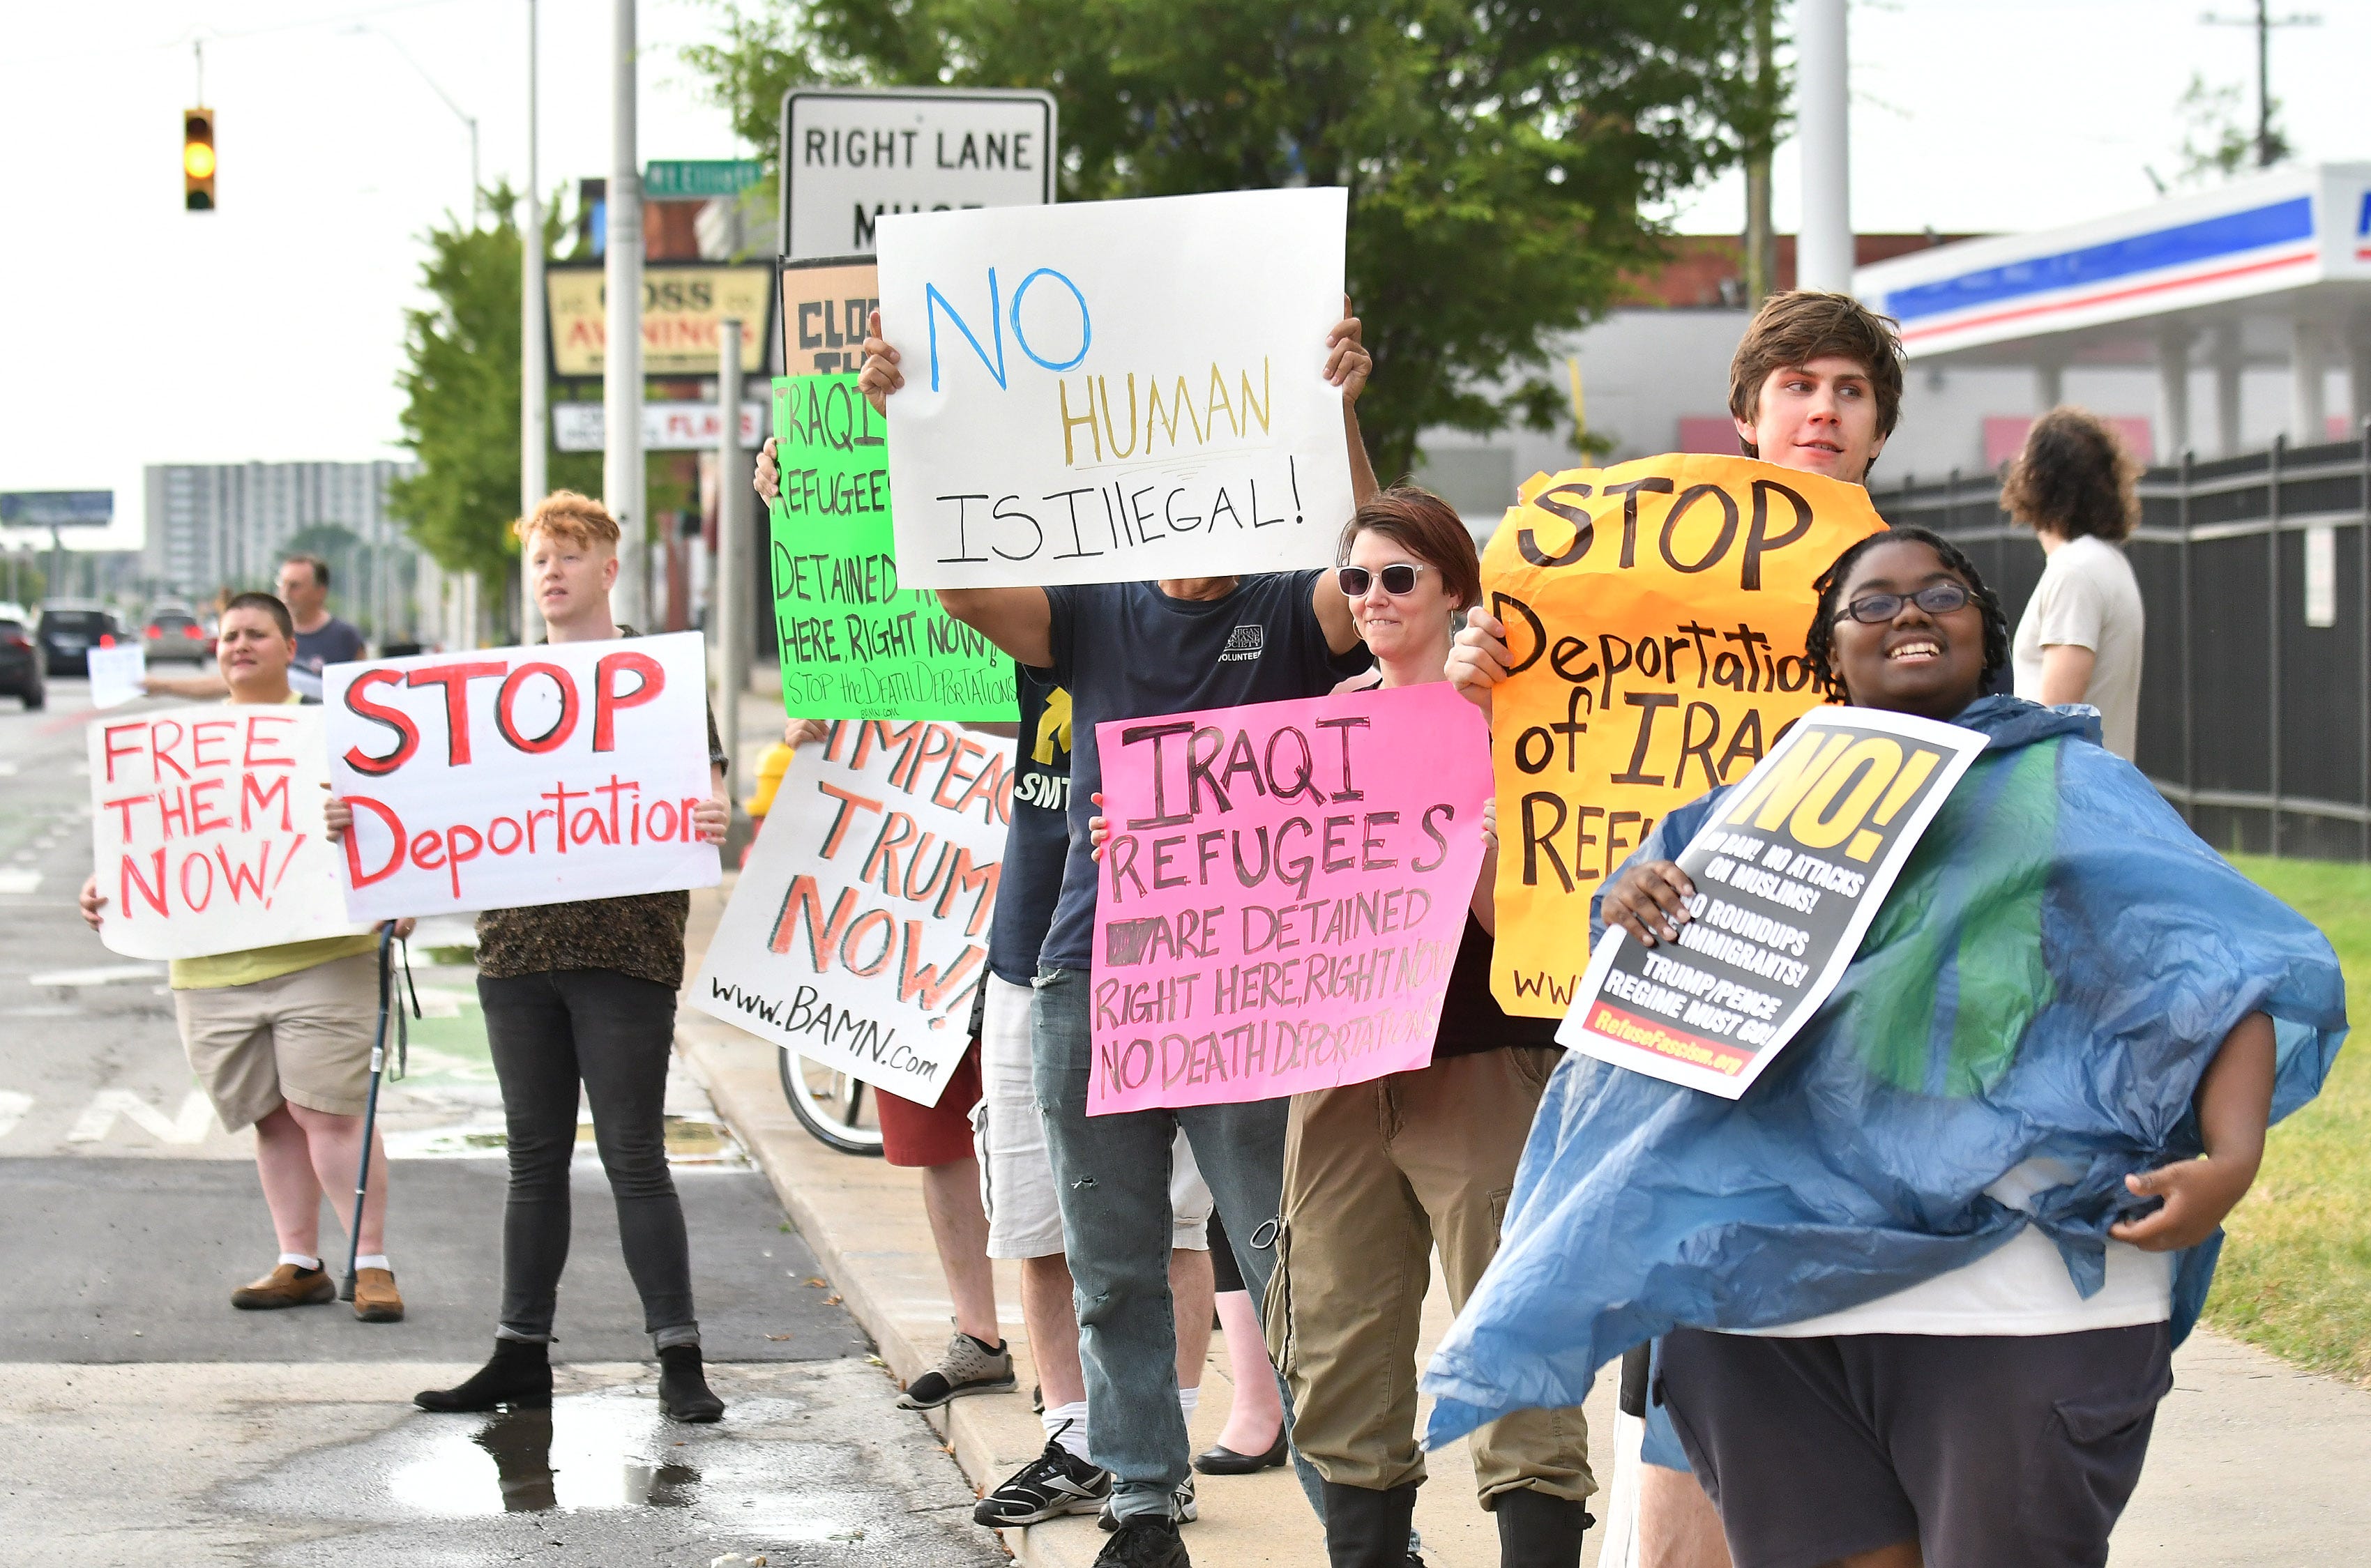 People protest in front of the ICE Detroit Field Office in Detroit Friday evening after  five Iraqis allegedly were detained and held for deportation.